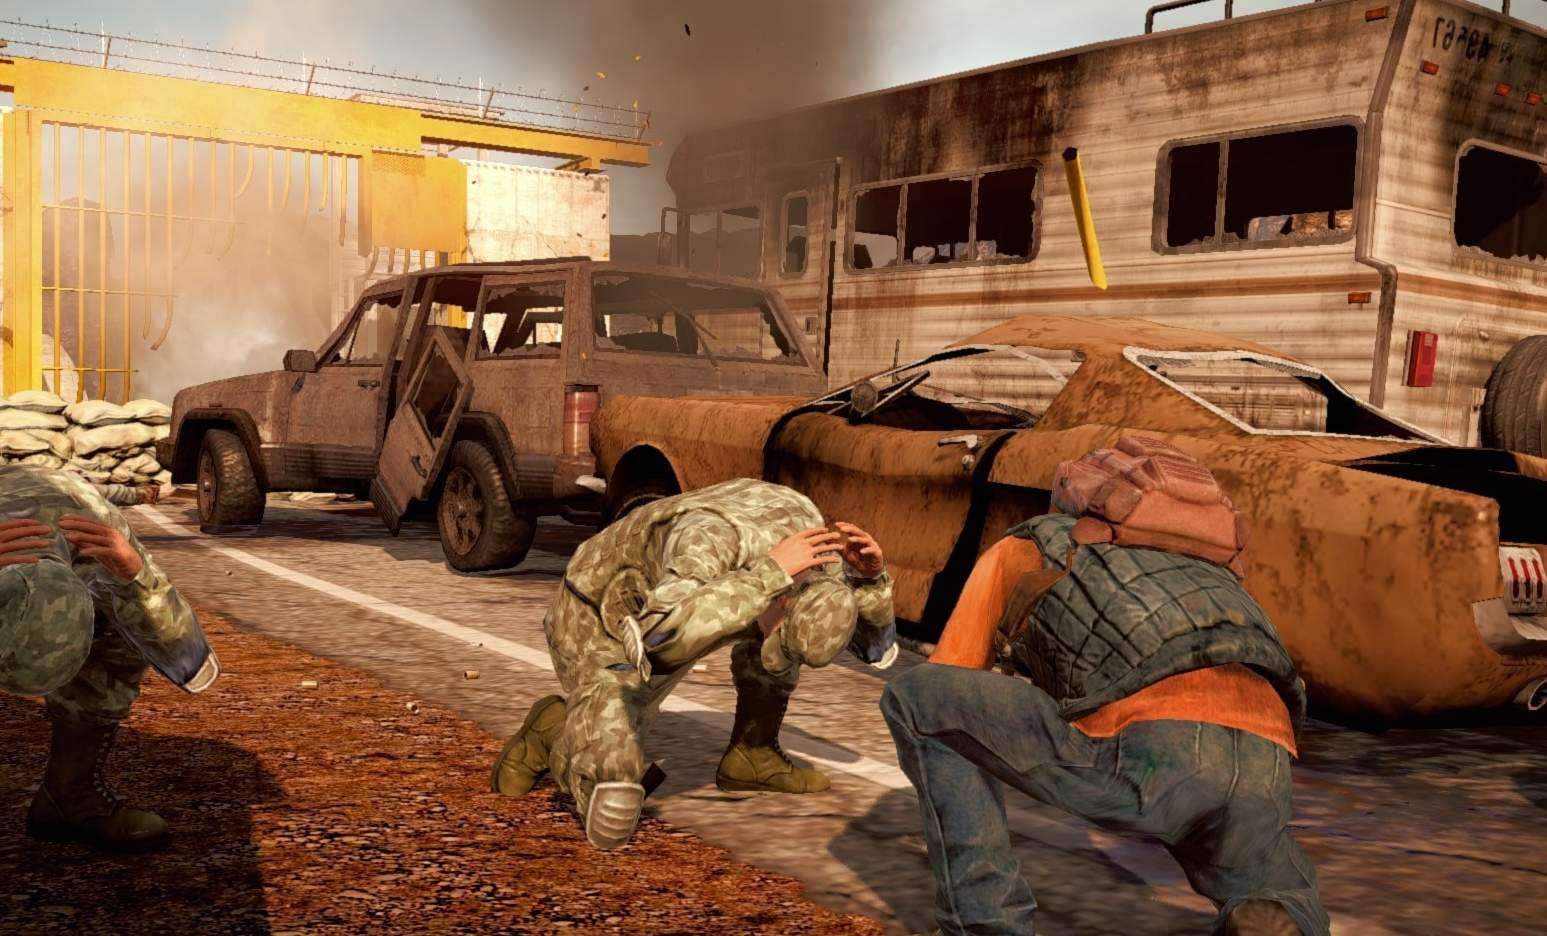 state of decay cheats steam